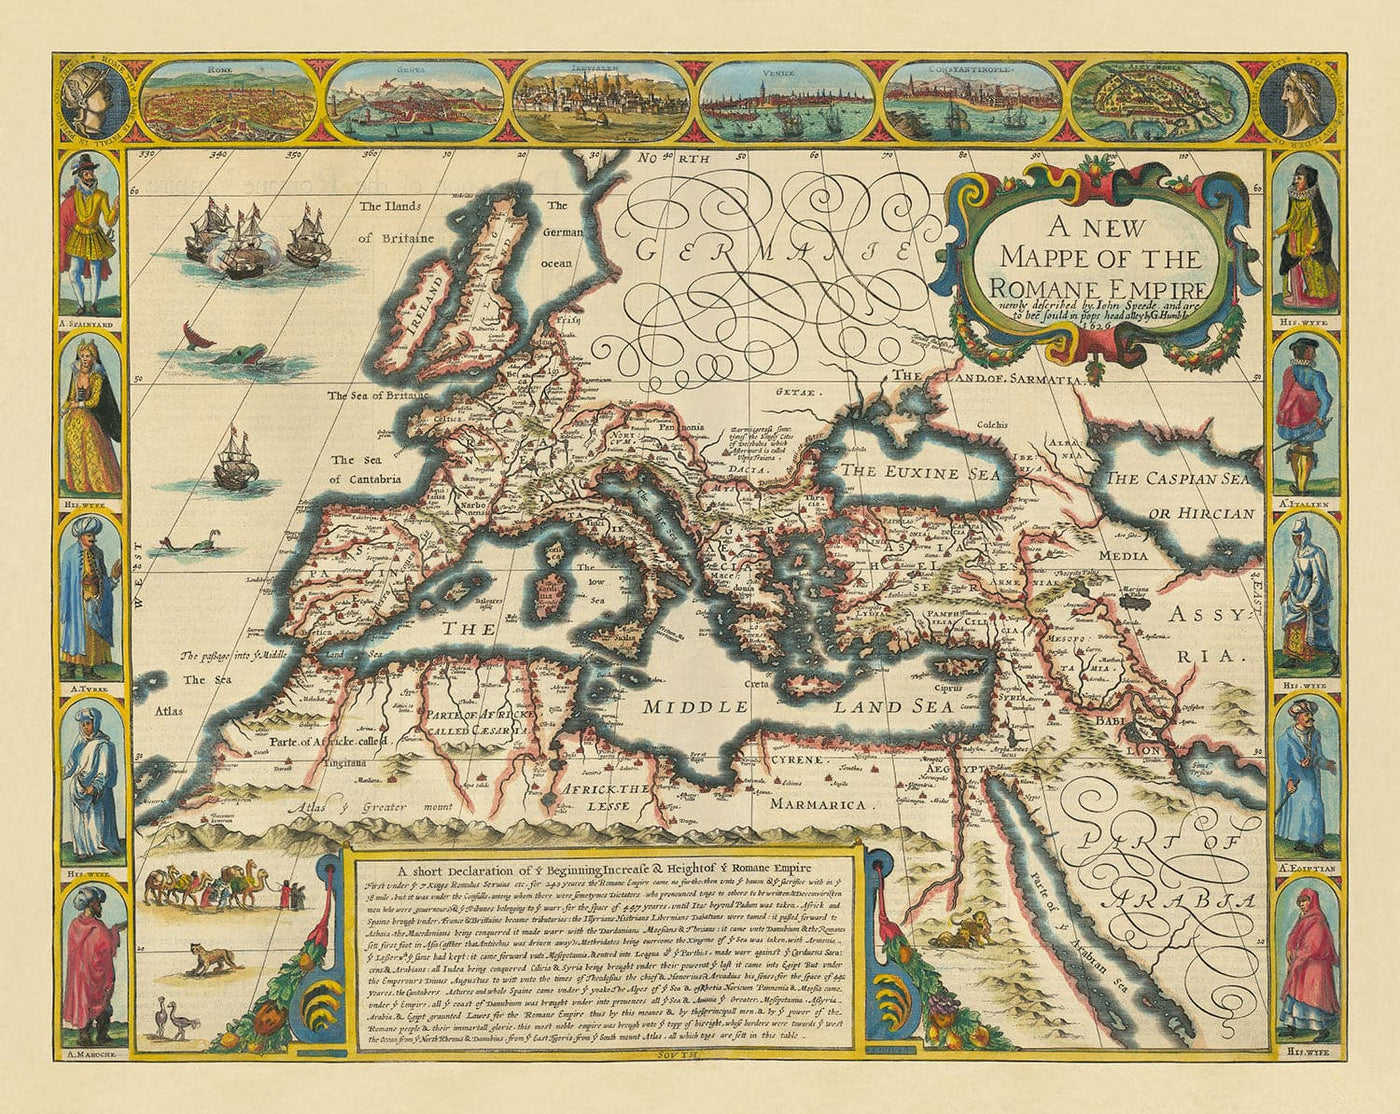 Old Roman Empire World Map, 1626 by John Speed - Rare Wall Art of Western and Byzantine